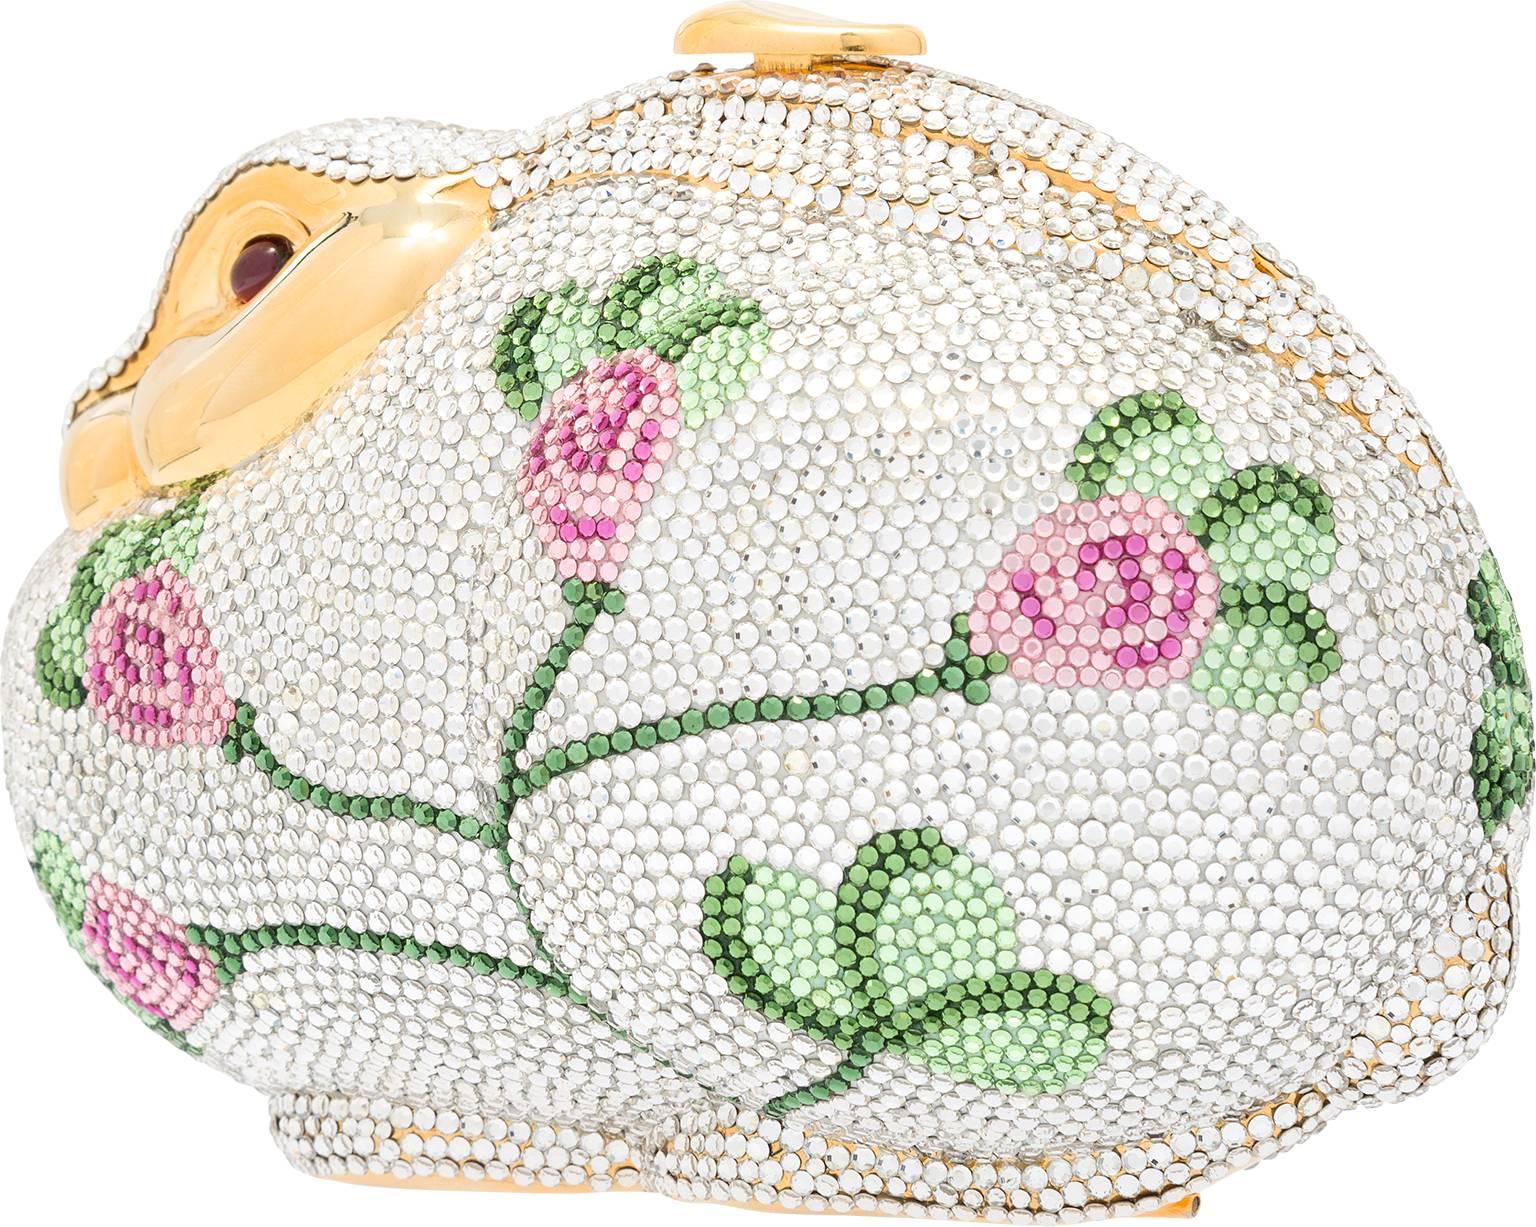 HOP into spring with this adorable rabbit inspired Judith Leiber minaudiere! As with many of her figural pieces, this rabbit has a sweet, whimsical nature. Done in an array of sparkling silver crystals, the rabbit is accented with a pink and green